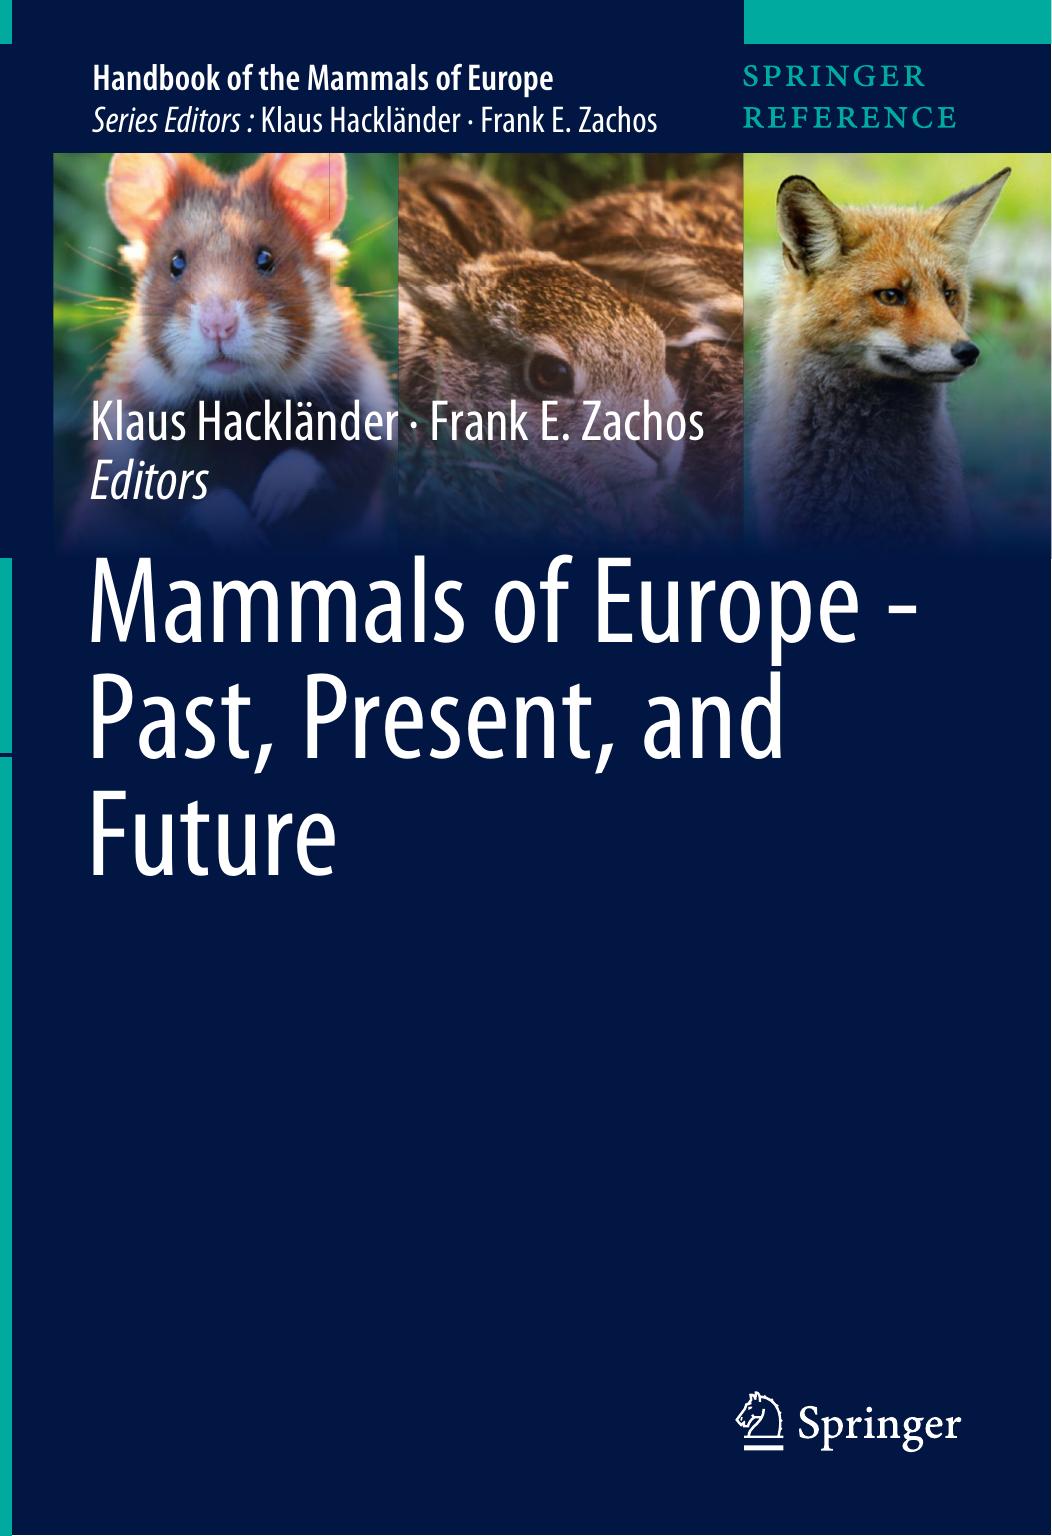 Mammals of europe : past, present, and future